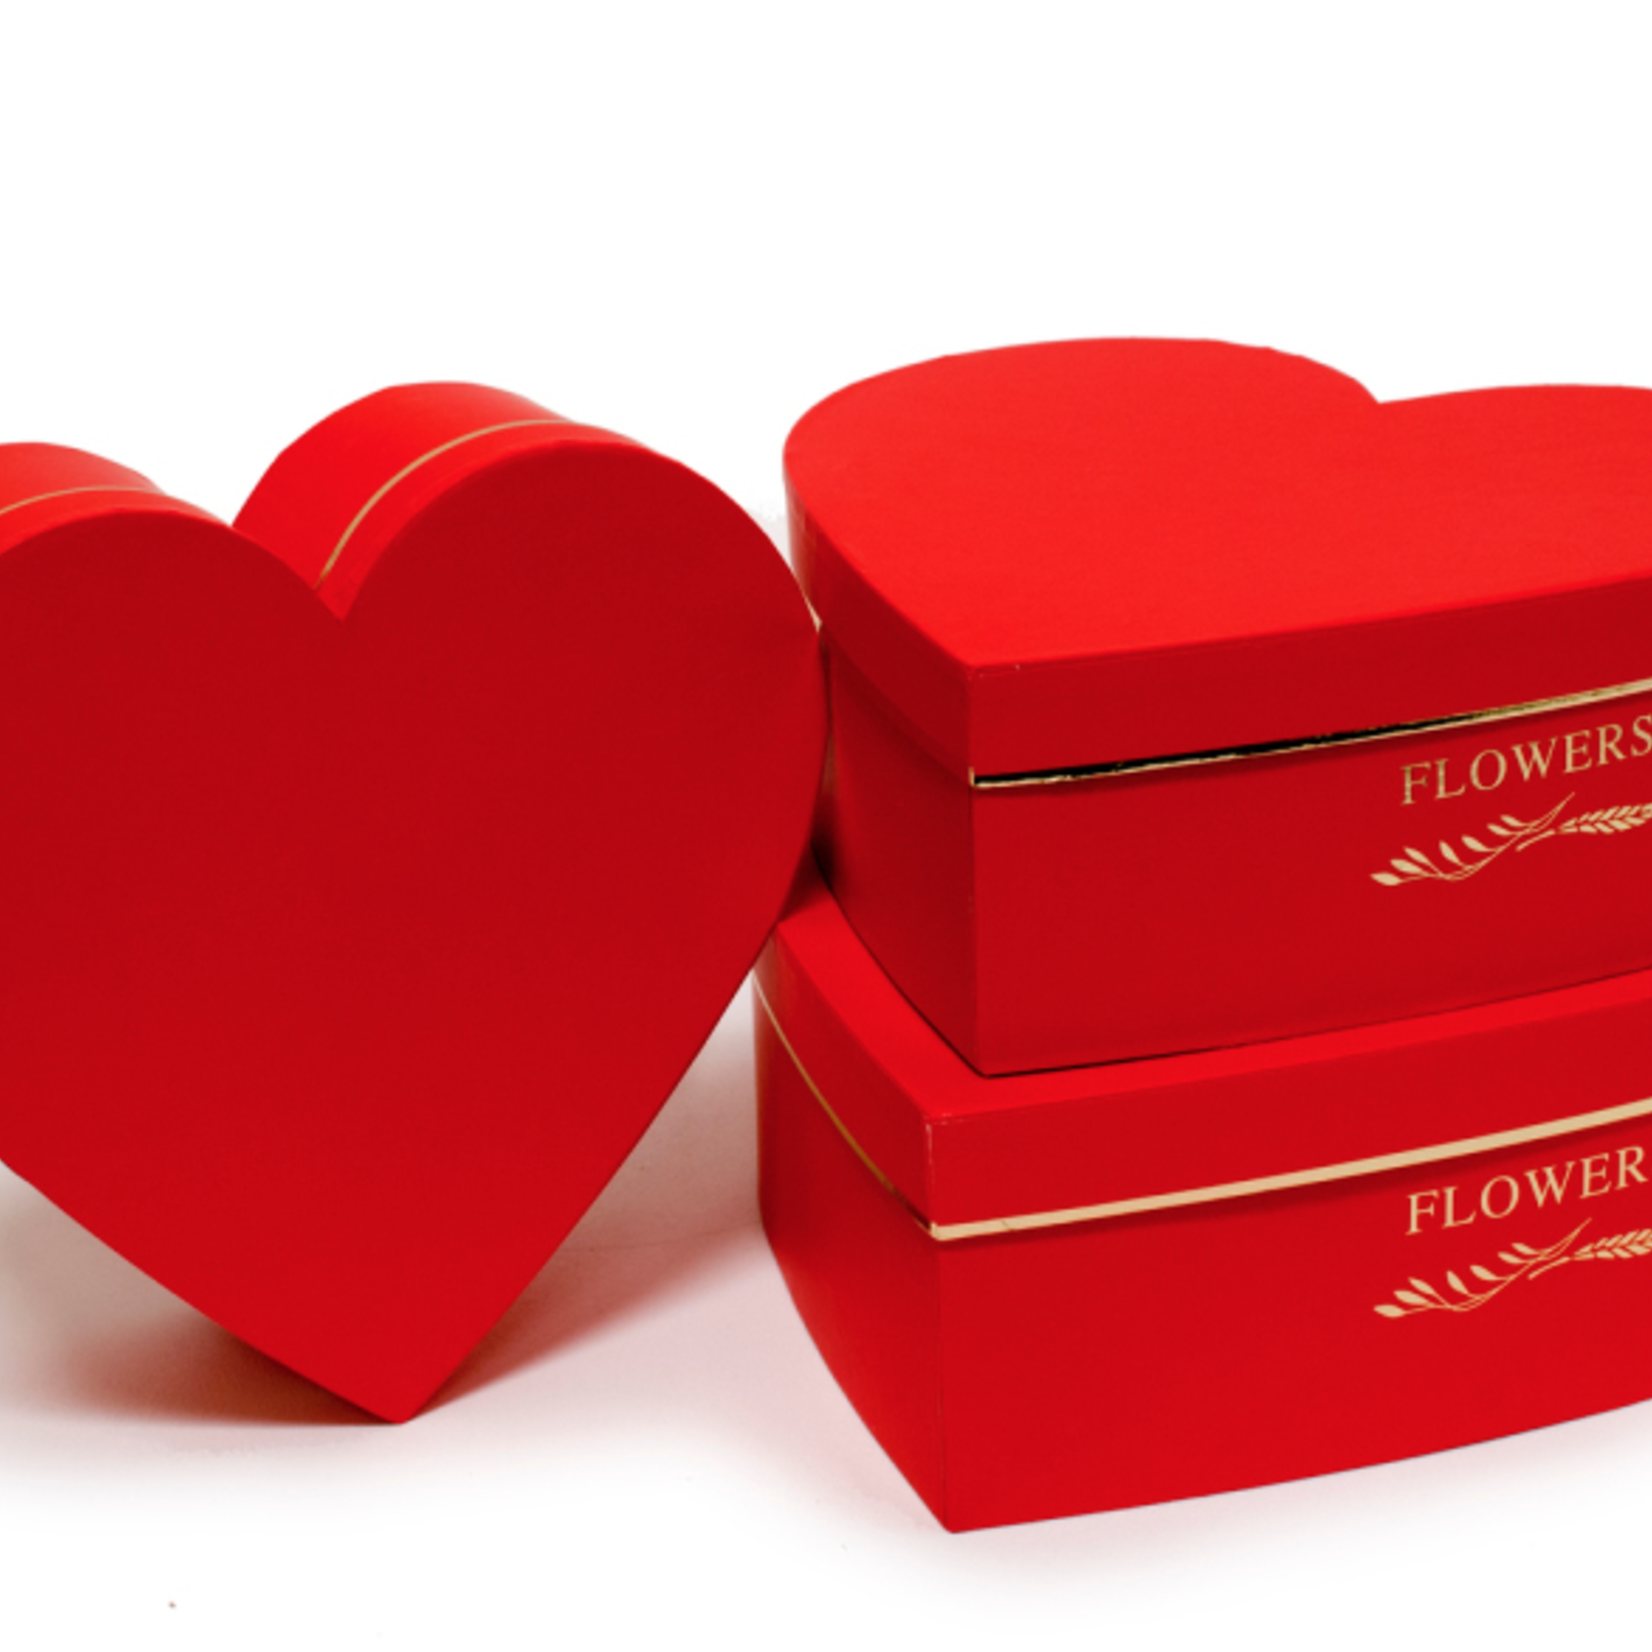 13” x 12.8” x 4.5”H Royal Red and Gold Heart-Shaped Box LARGE